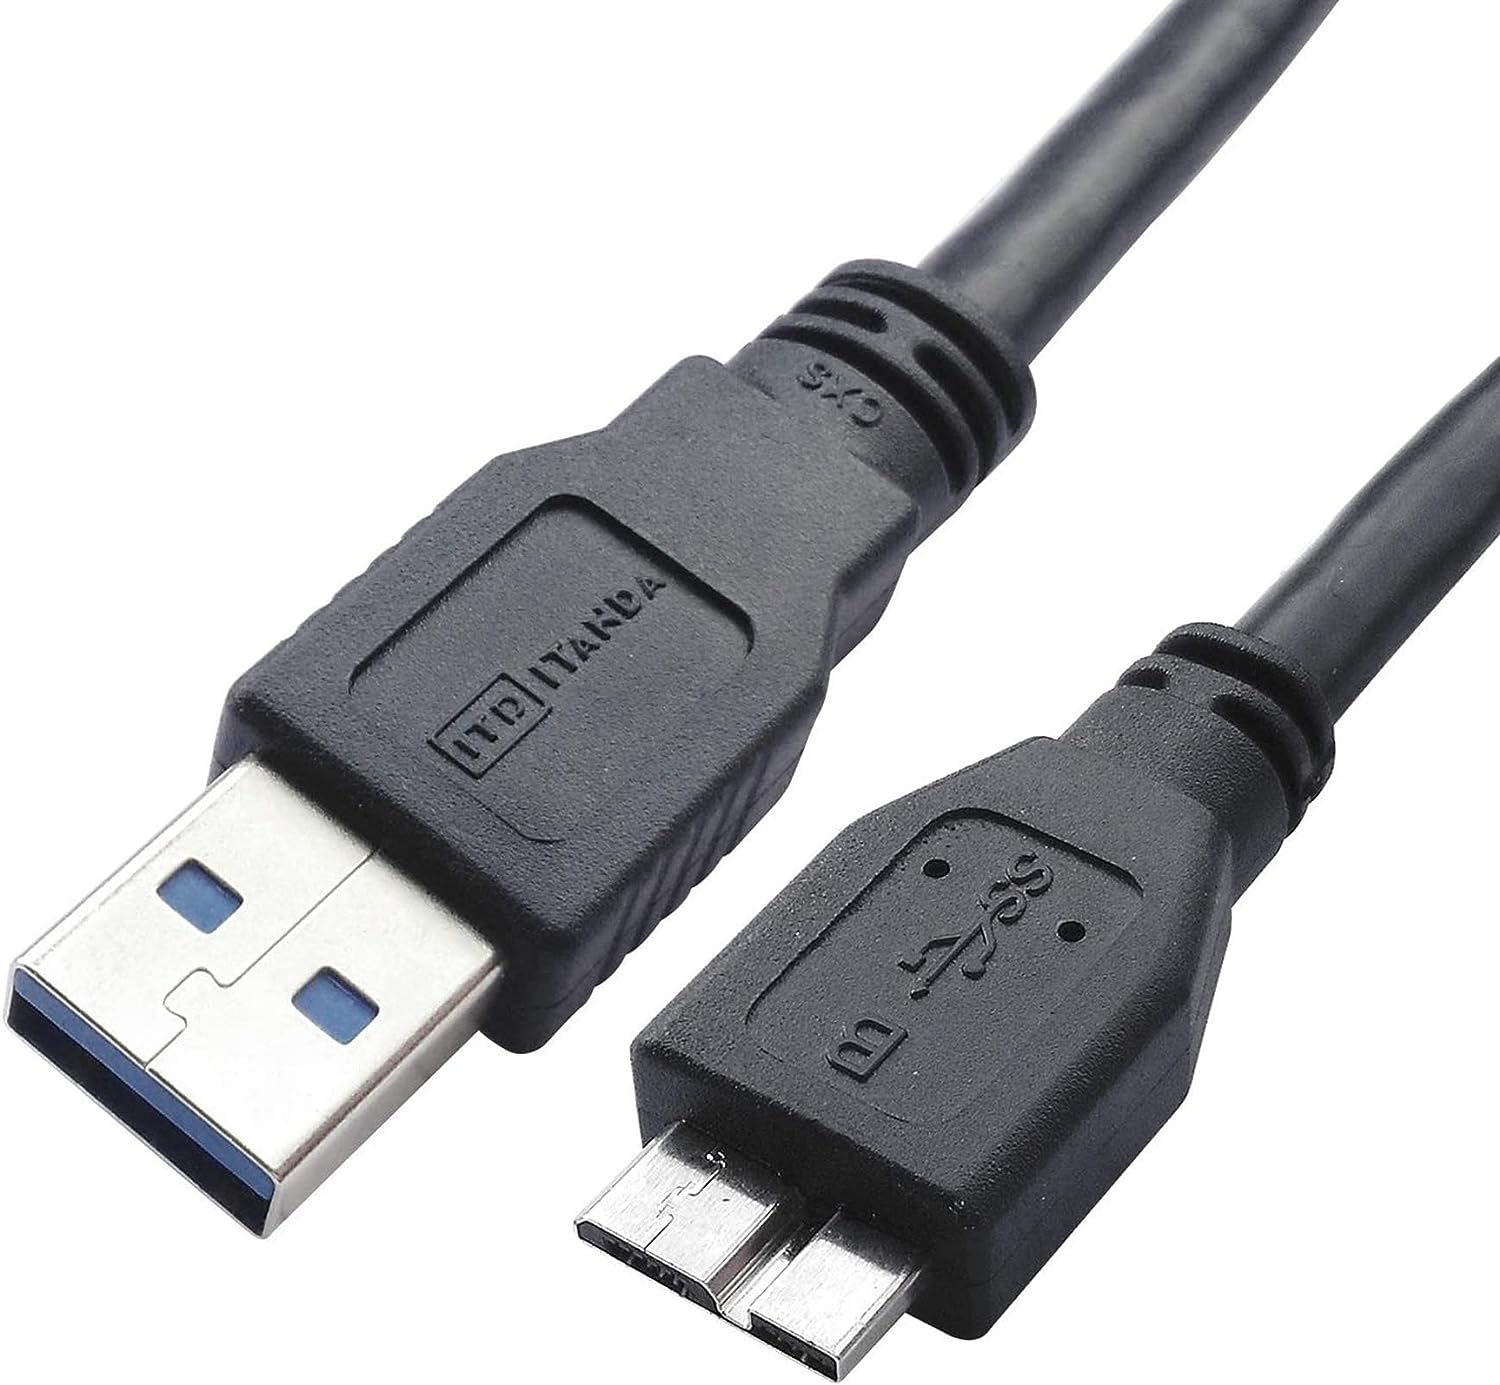 Micro USB 3.0 Cable, 1.5ft External Hard Drive Cable [...]